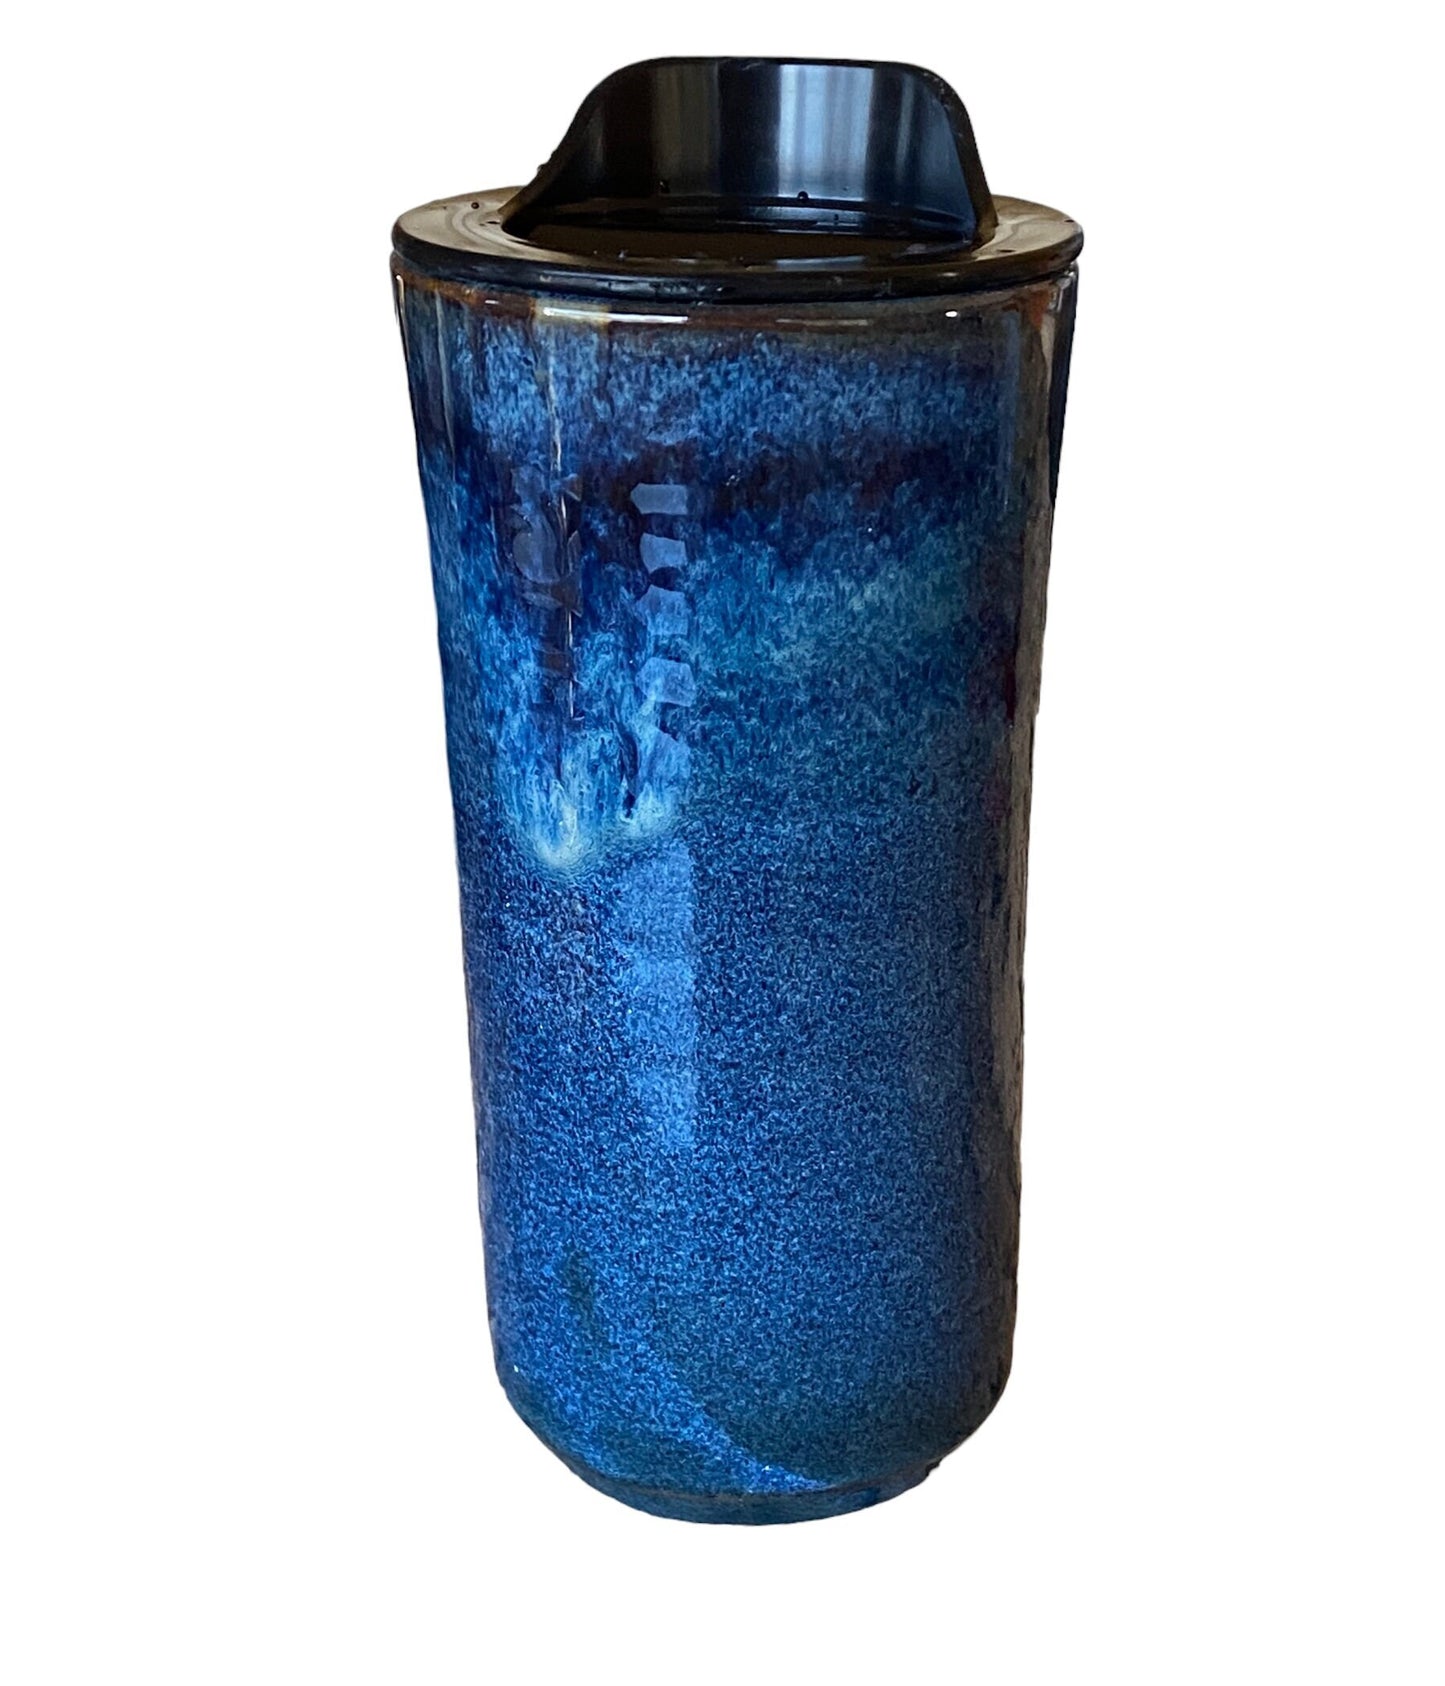 Handmade 16-Ounce Waterfall Blue Travel Mug - Empowerment Embodied with the Word "Vote" - Stylish and Meaningful Travel Companion